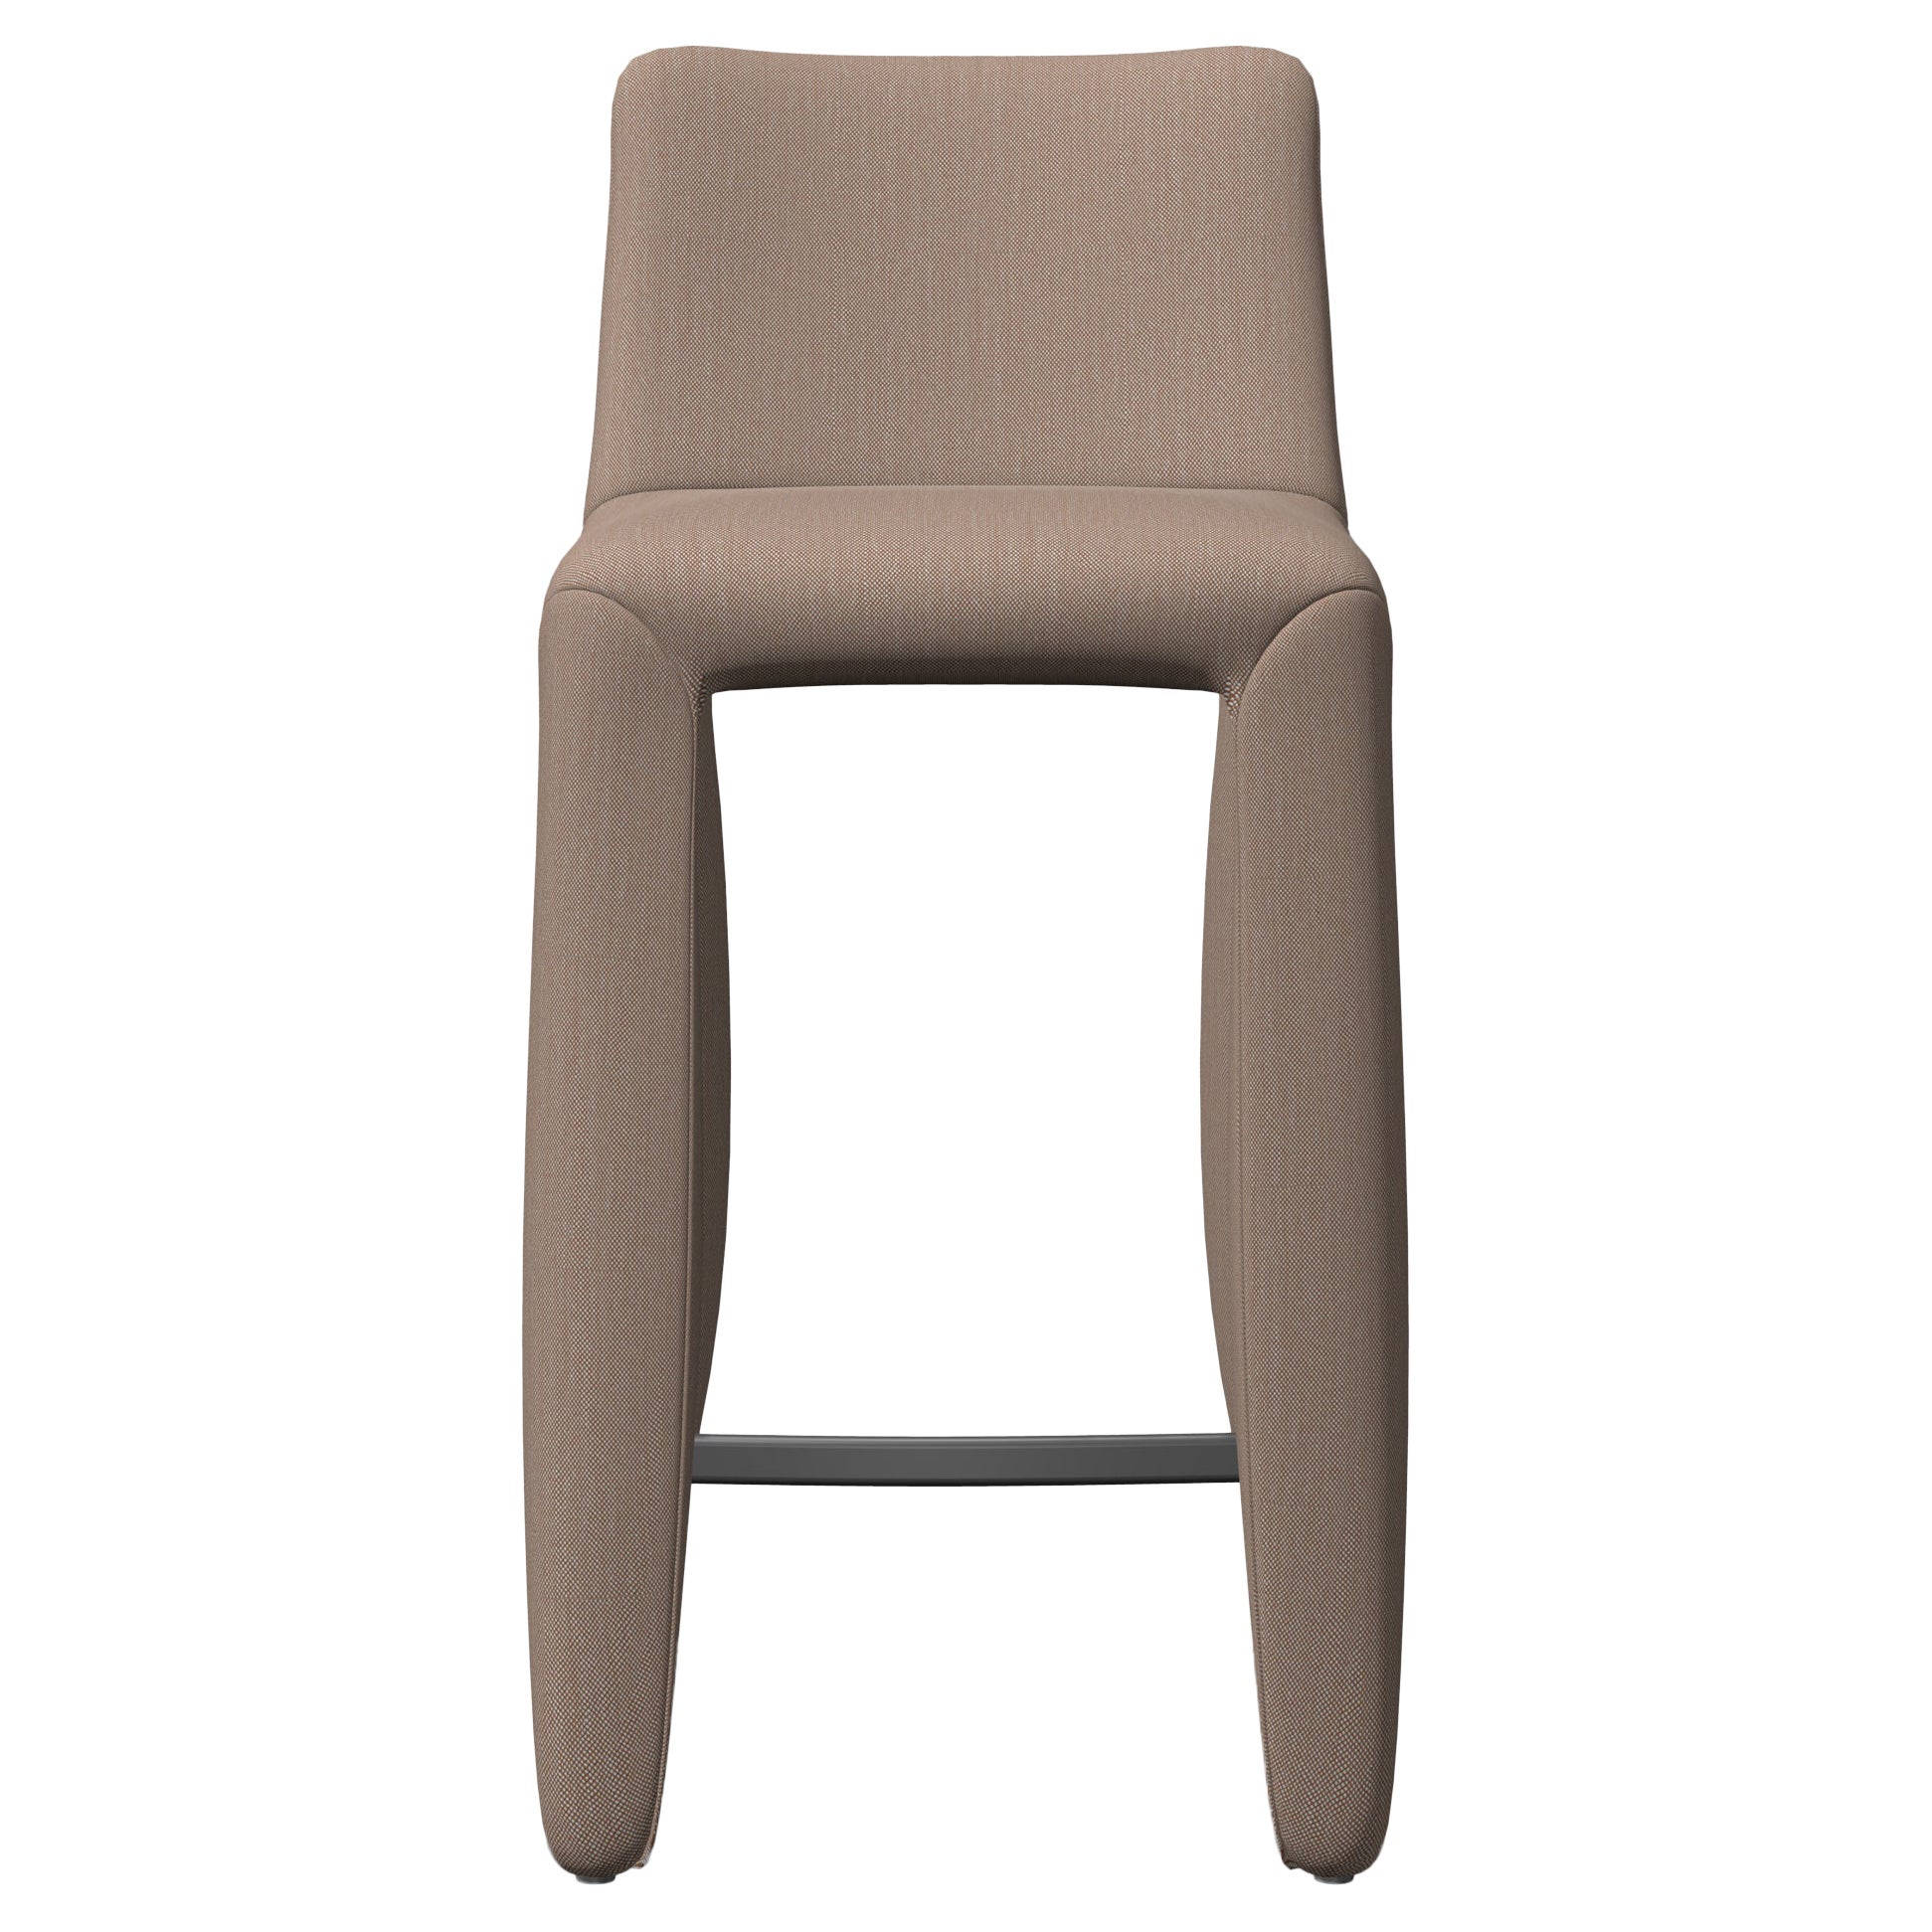 Moooi Monster Naked Low Barstool in Canvas 2, 614 by Marcel Wanders Studio For Sale